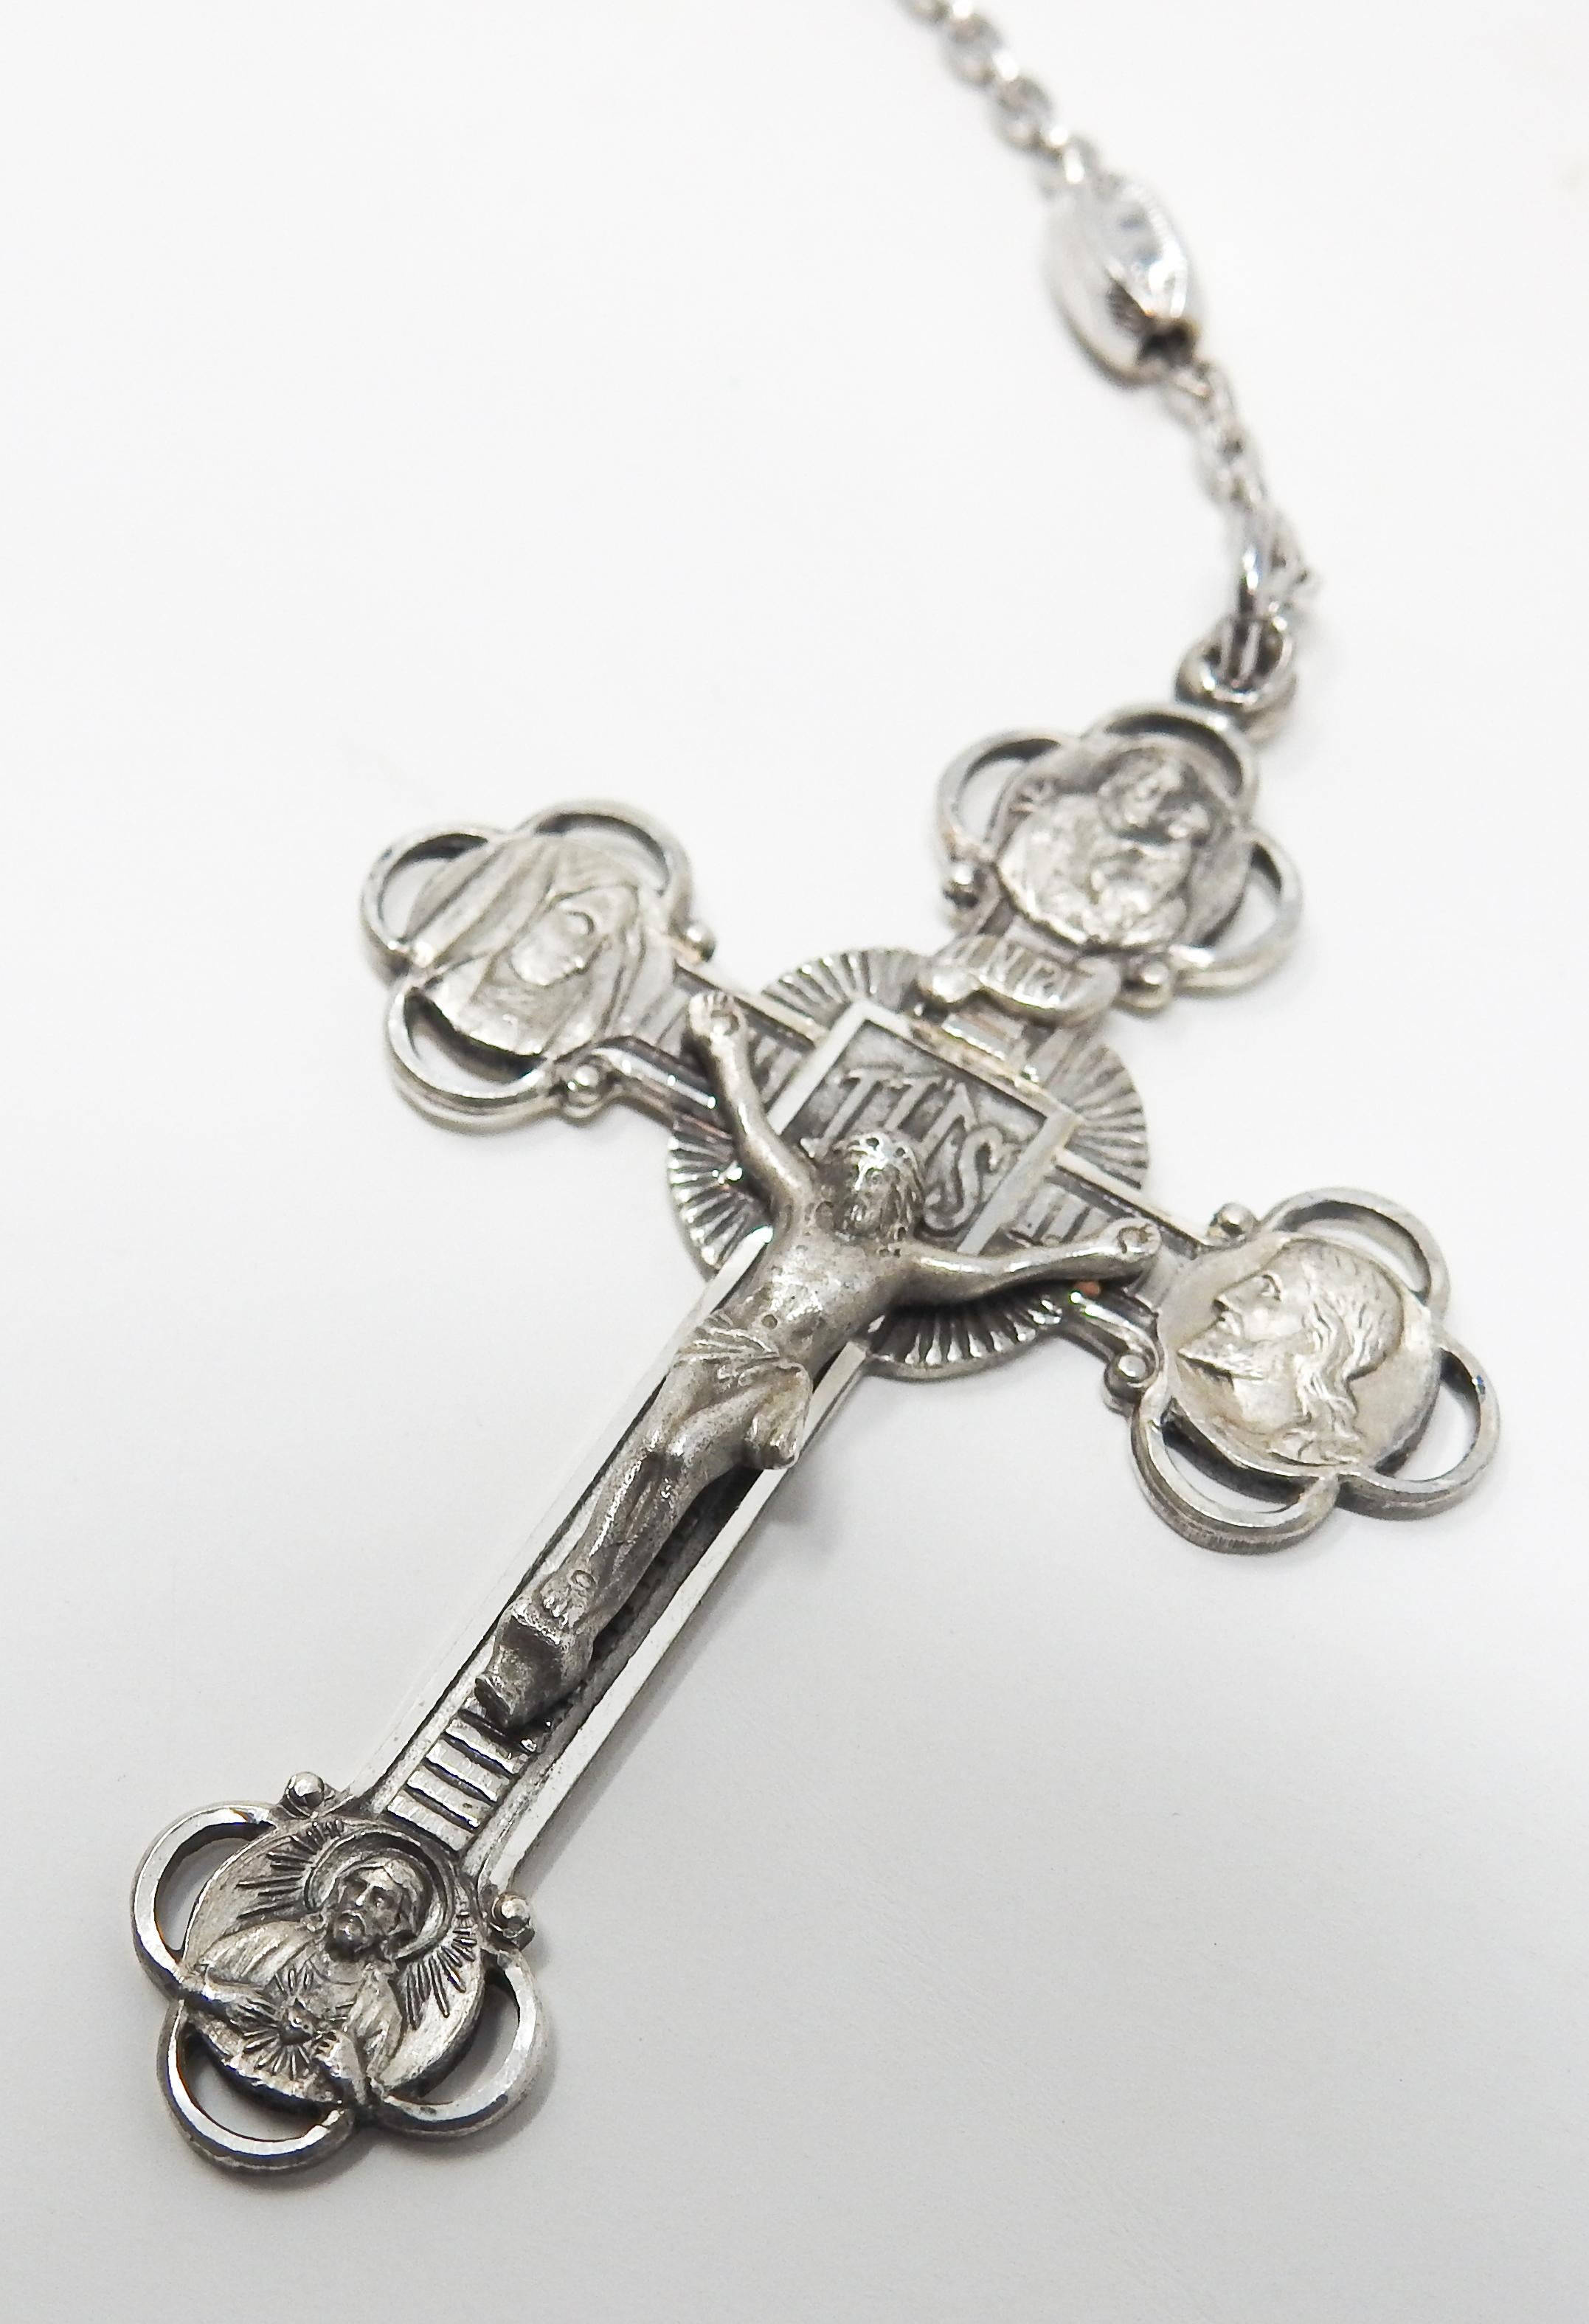 Offering this immaculate sterling silver rosary by AFCO Sterling. The strand is sterling silver beads, and each of them have a cross and heart engraved on them. The heart that brings the chain together is marked sterling and has four engravings with